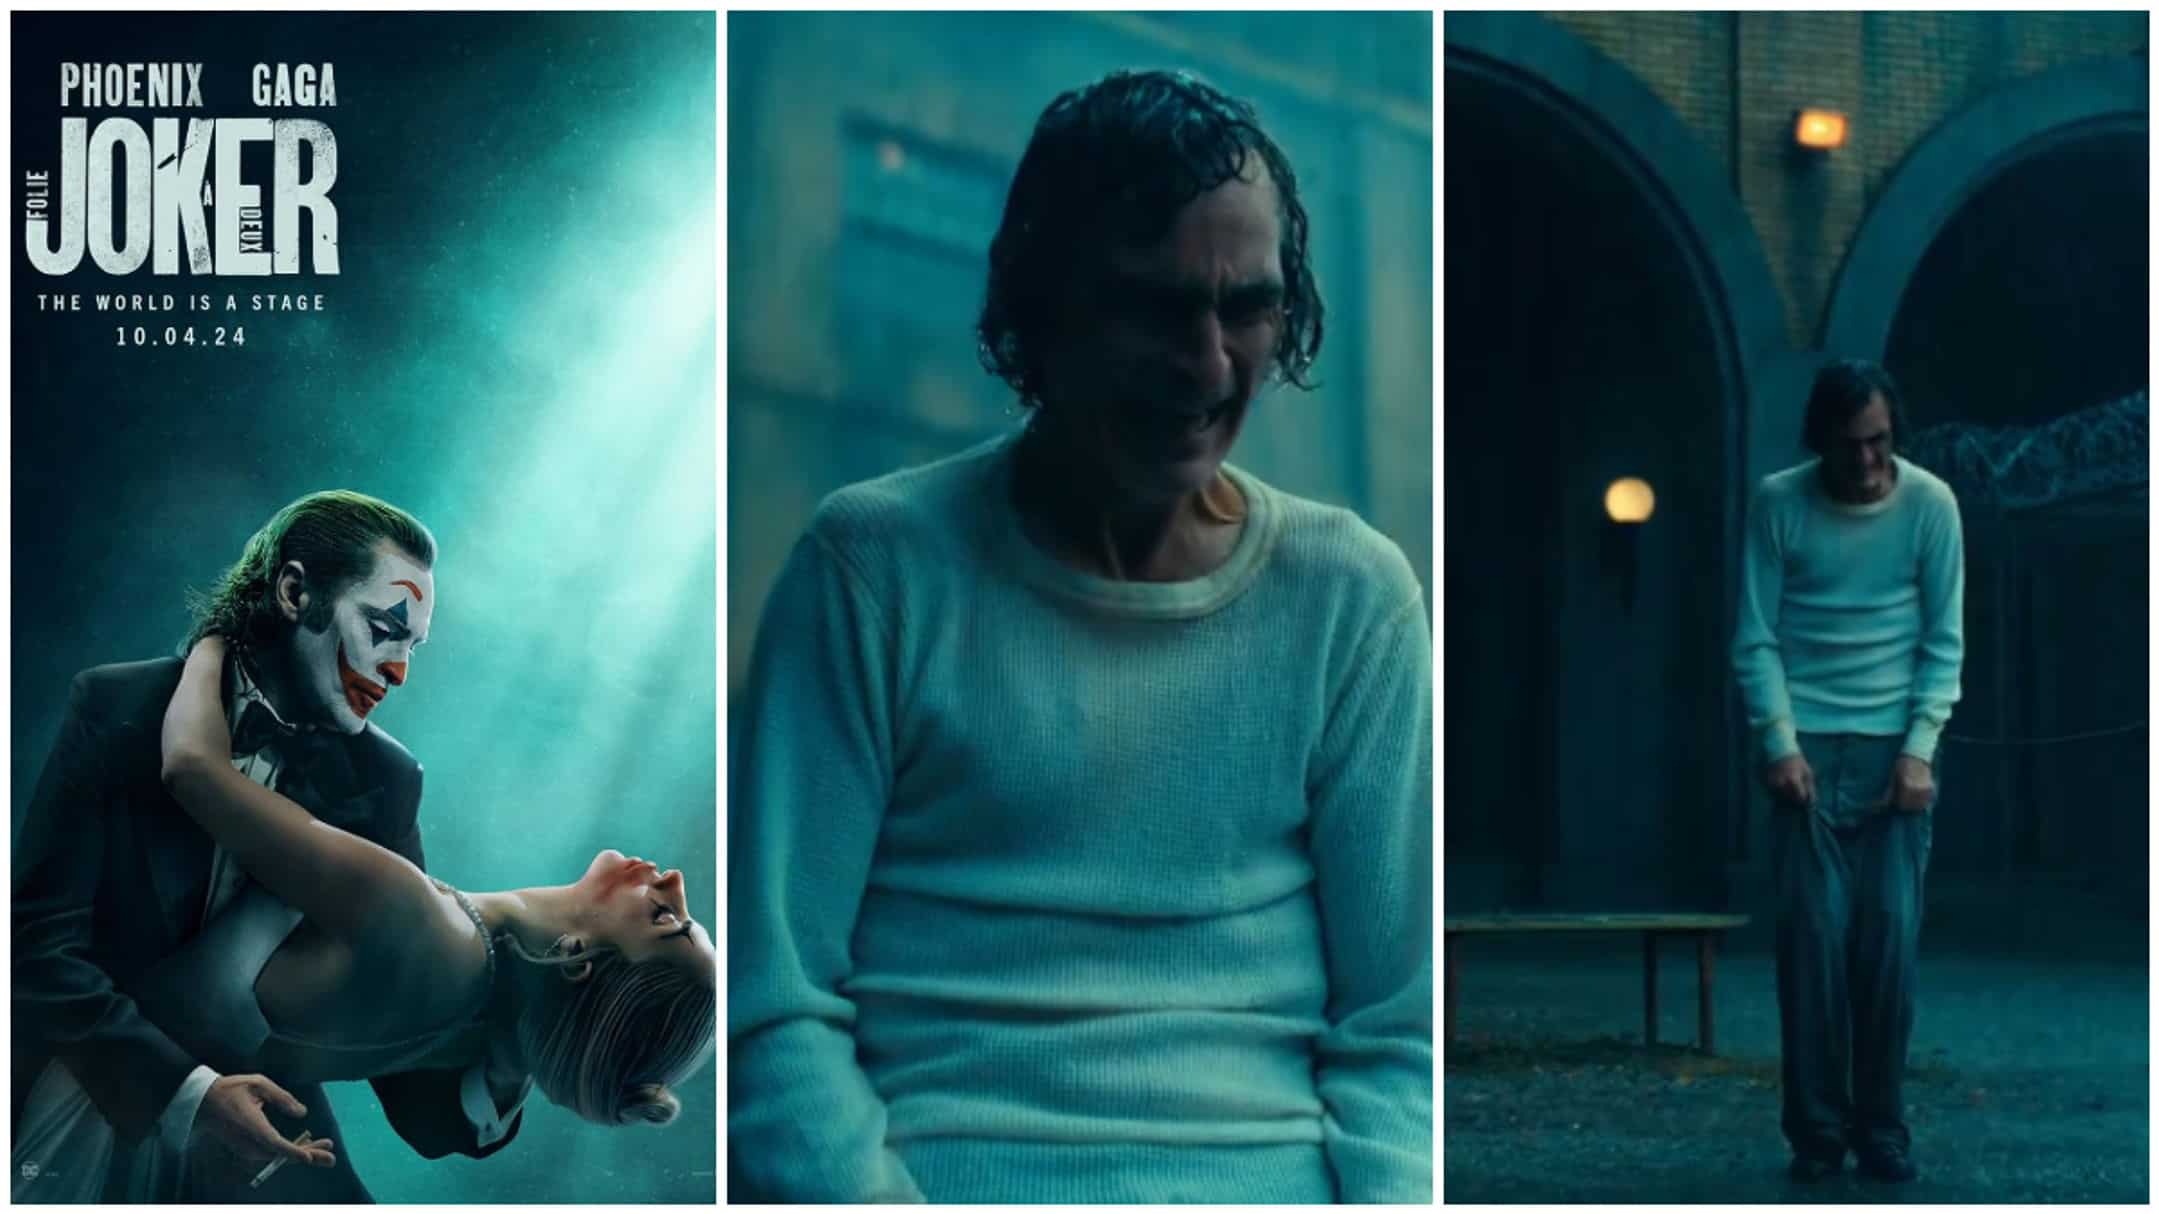 https://www.mobilemasala.com/movies/Joker-2-trailer-teaser-Catch-a-sneak-peek-of-this-Joaquin-Phoenix-led-film-as-shared-by-Todd-Phillips-along-with-an-announcement-i252487